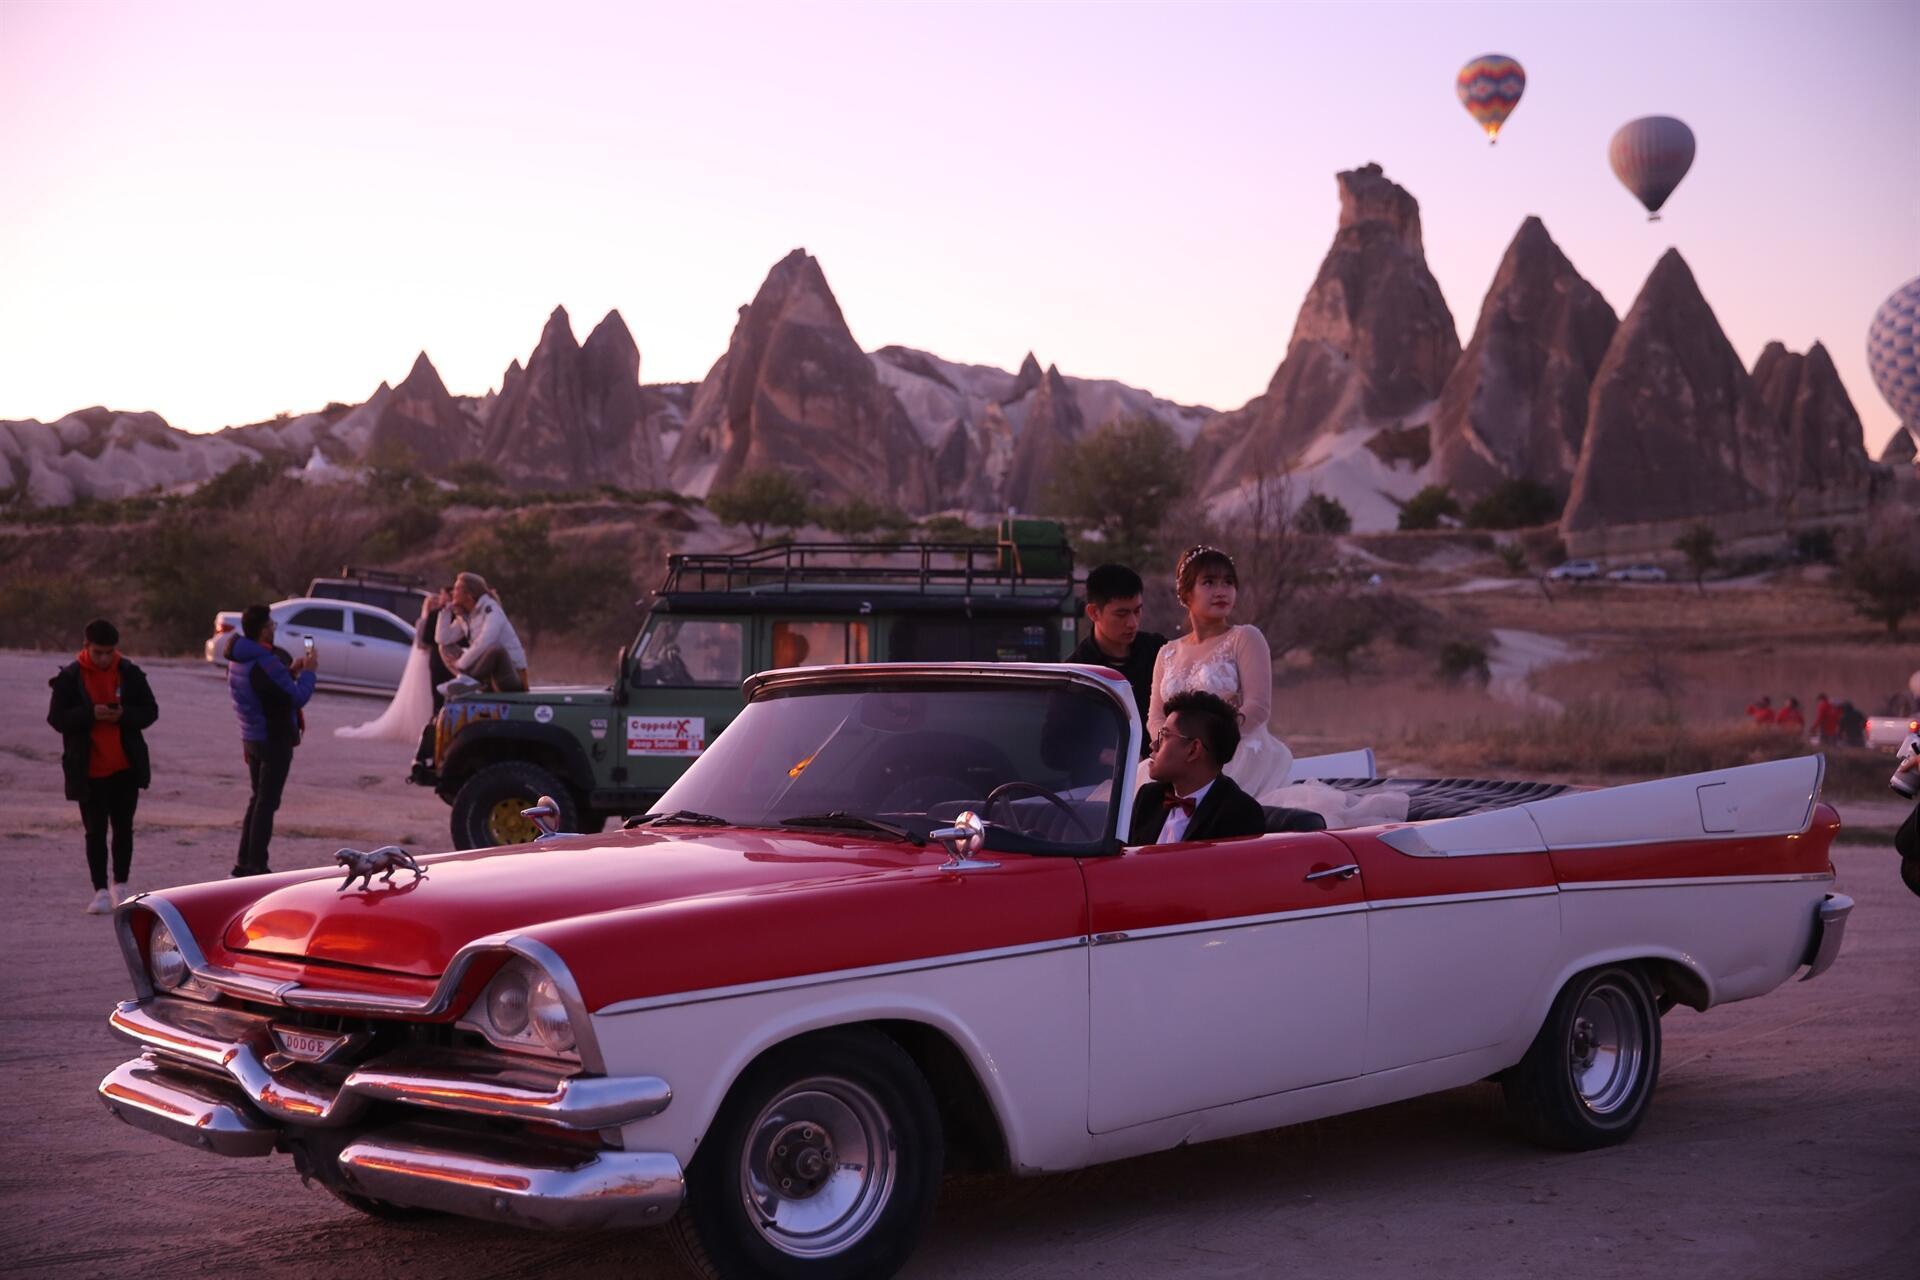 Visitors to Cappadocia class it up with vintage cars